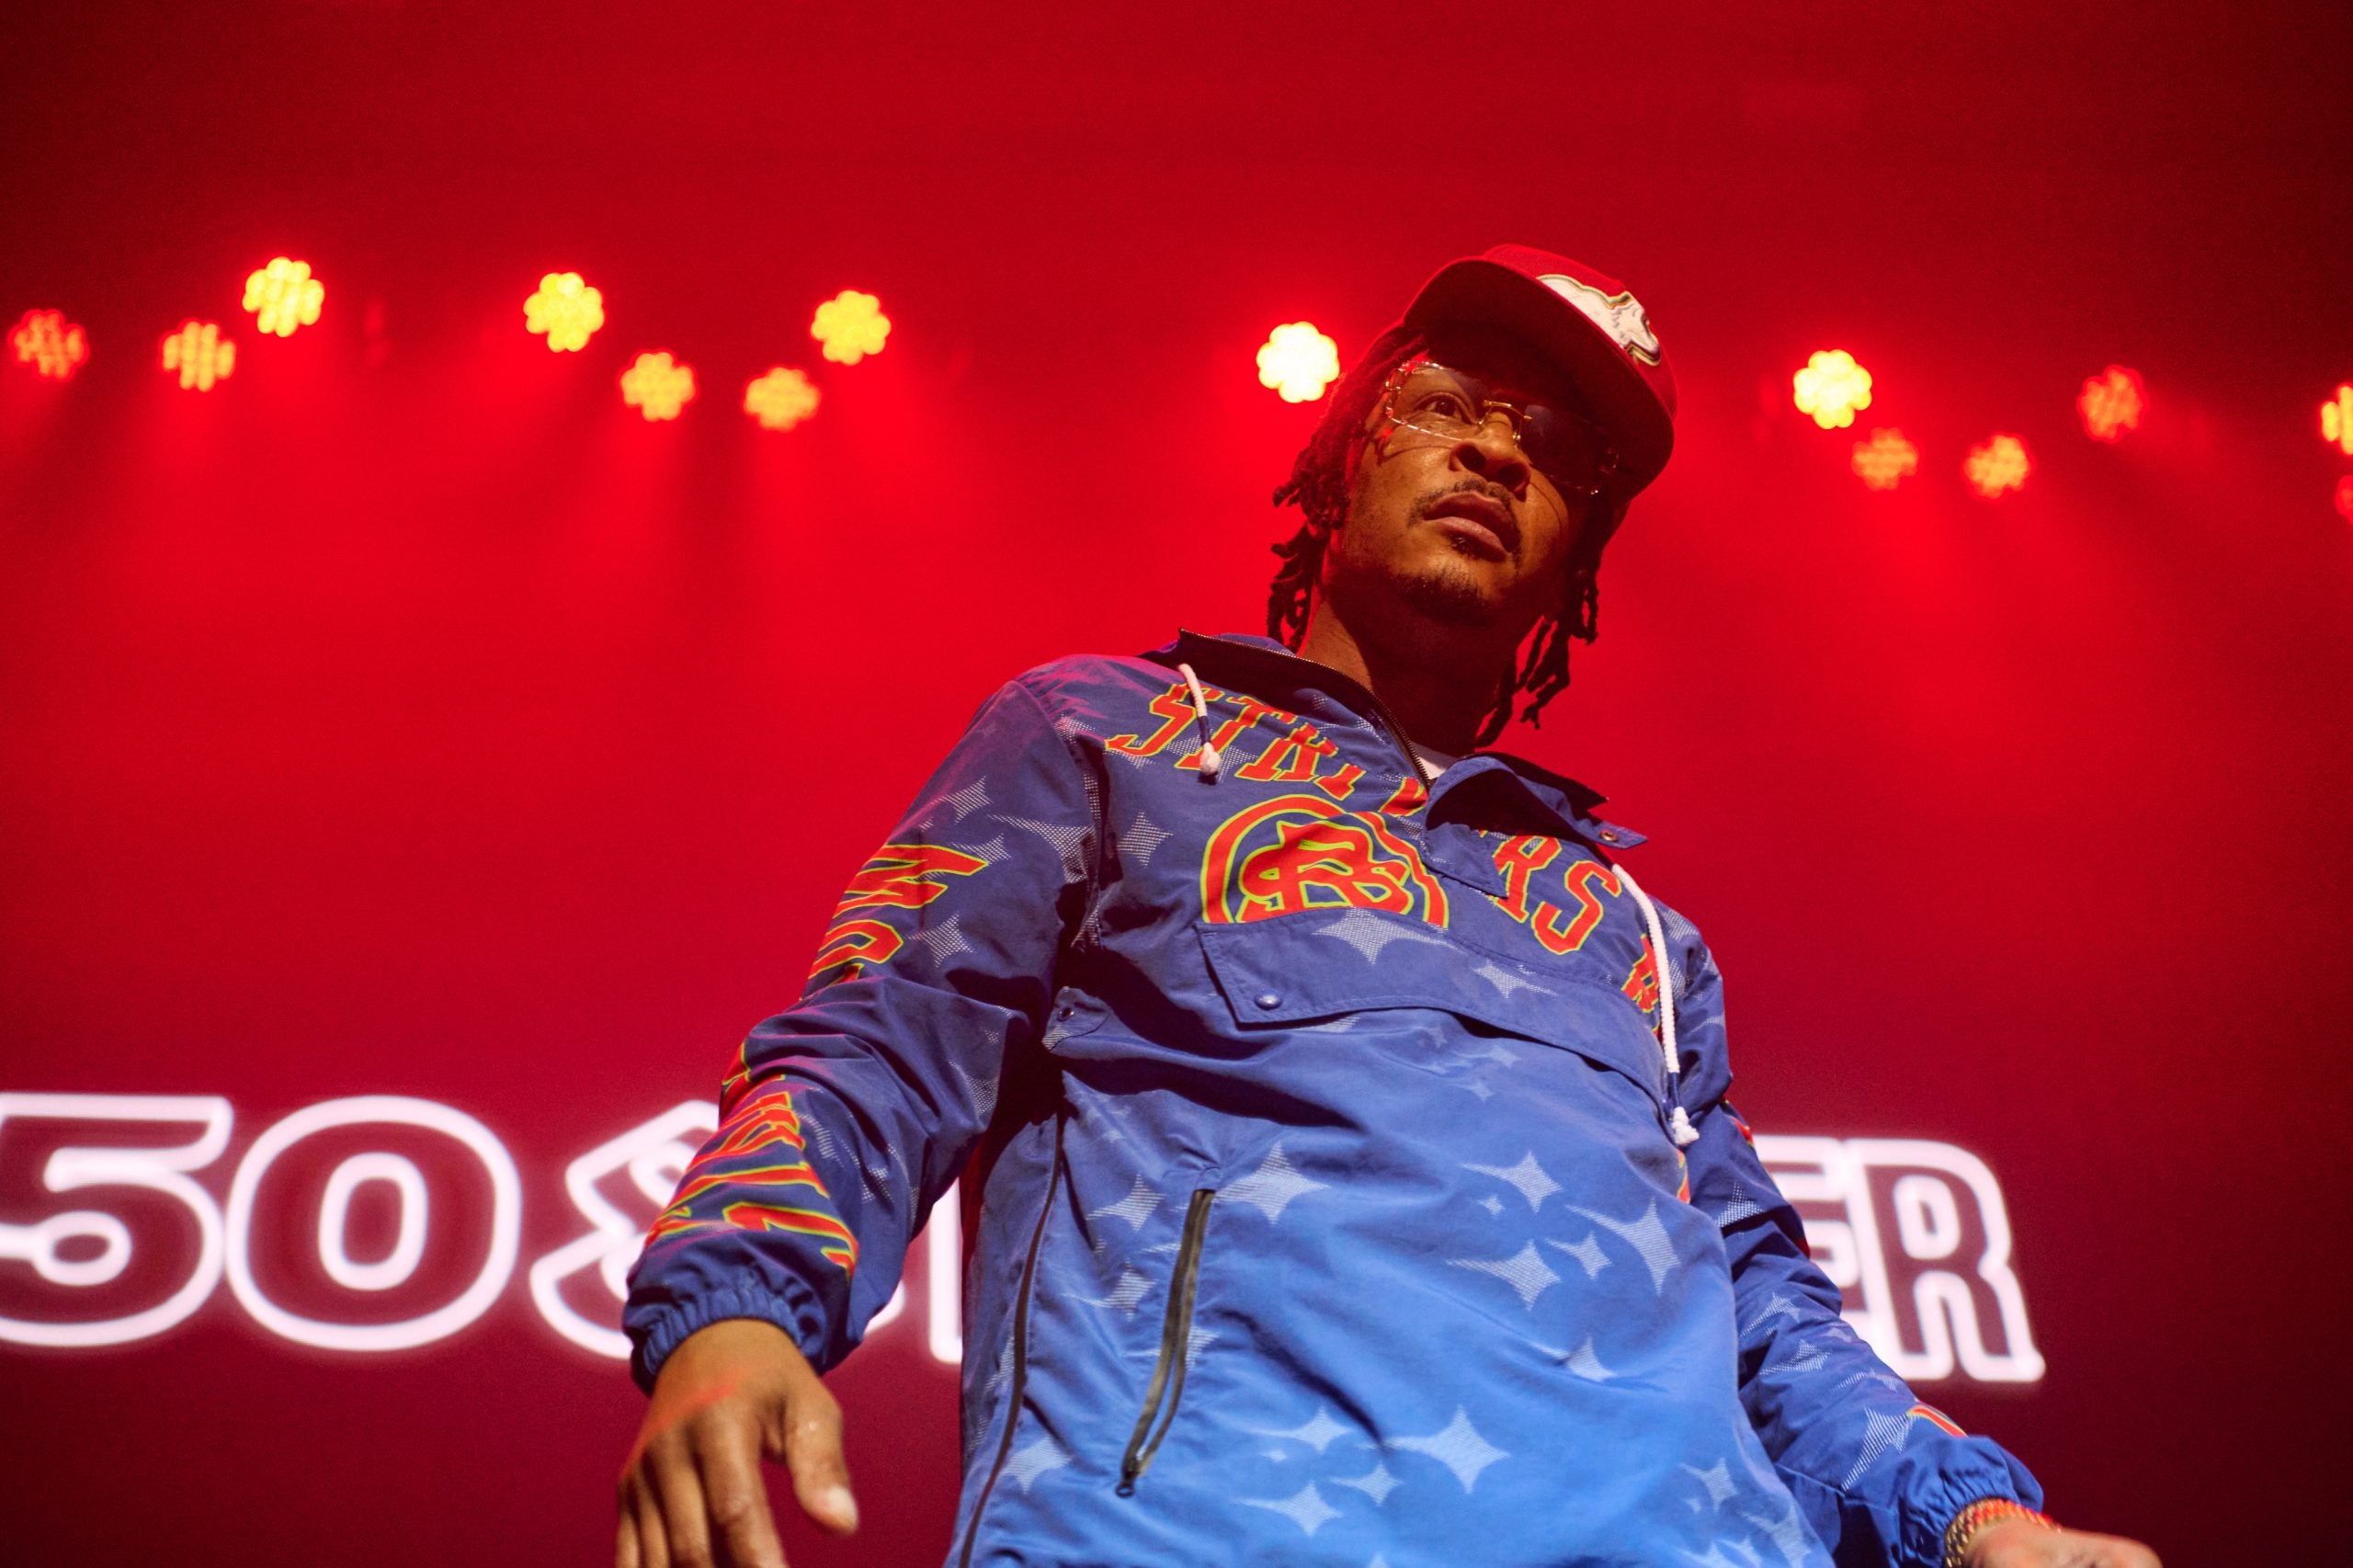 Jeezy, T.I. And More Rock The Crowd At Amazon’s ‘50 & Forever’